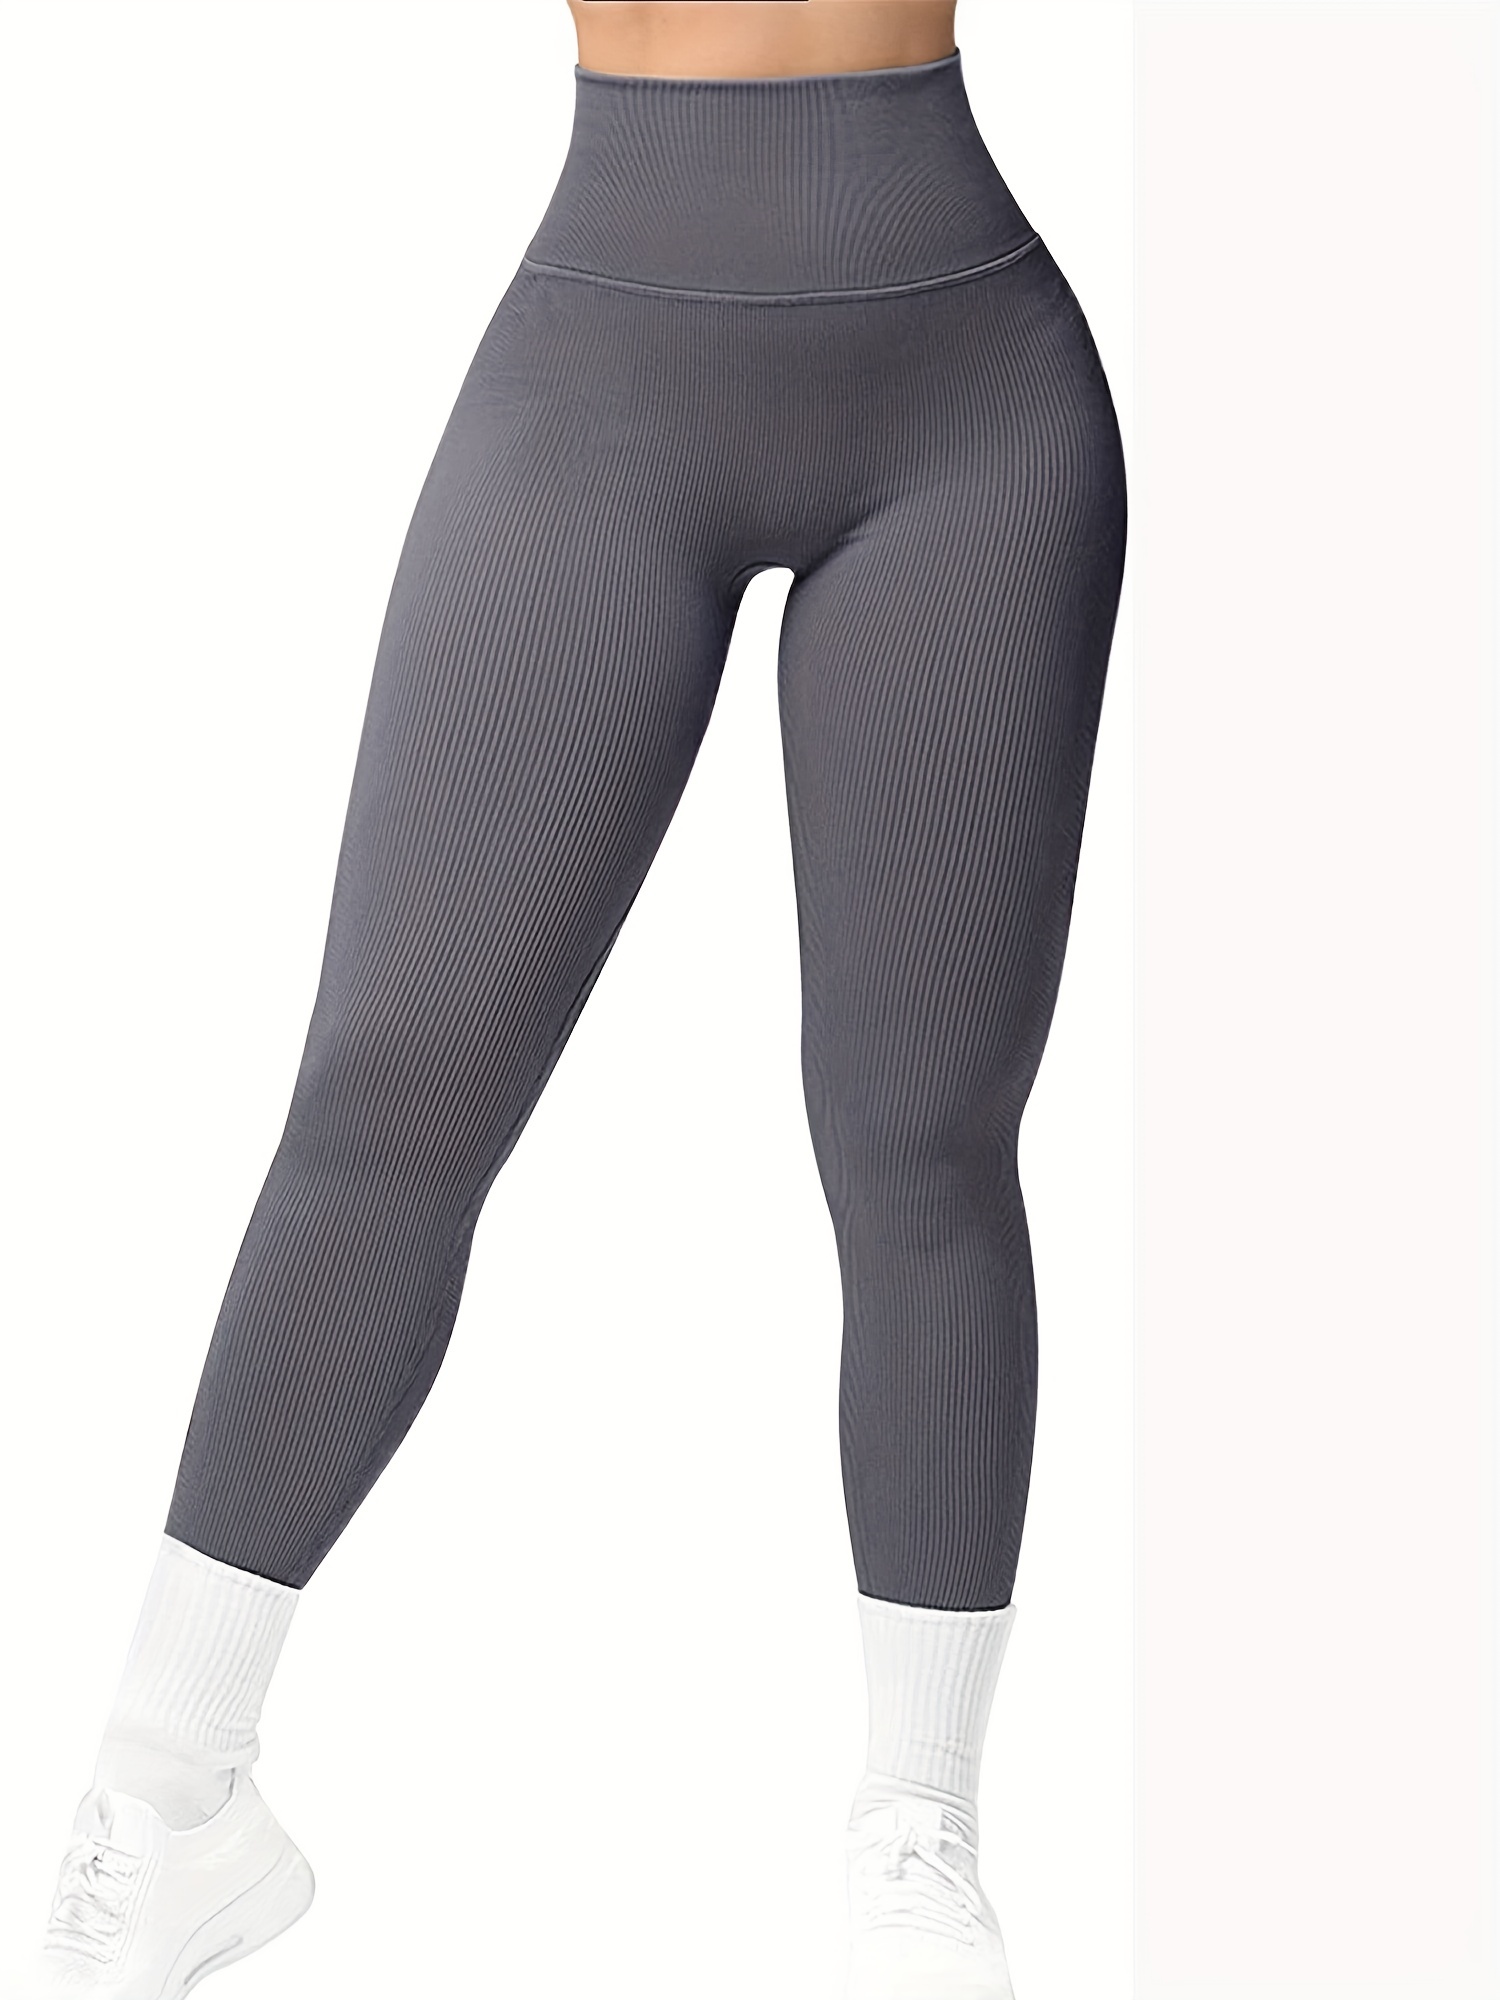 RBX LEGGINGS PANTS Womens Small Gray Tapered Leg Eork Out Gym